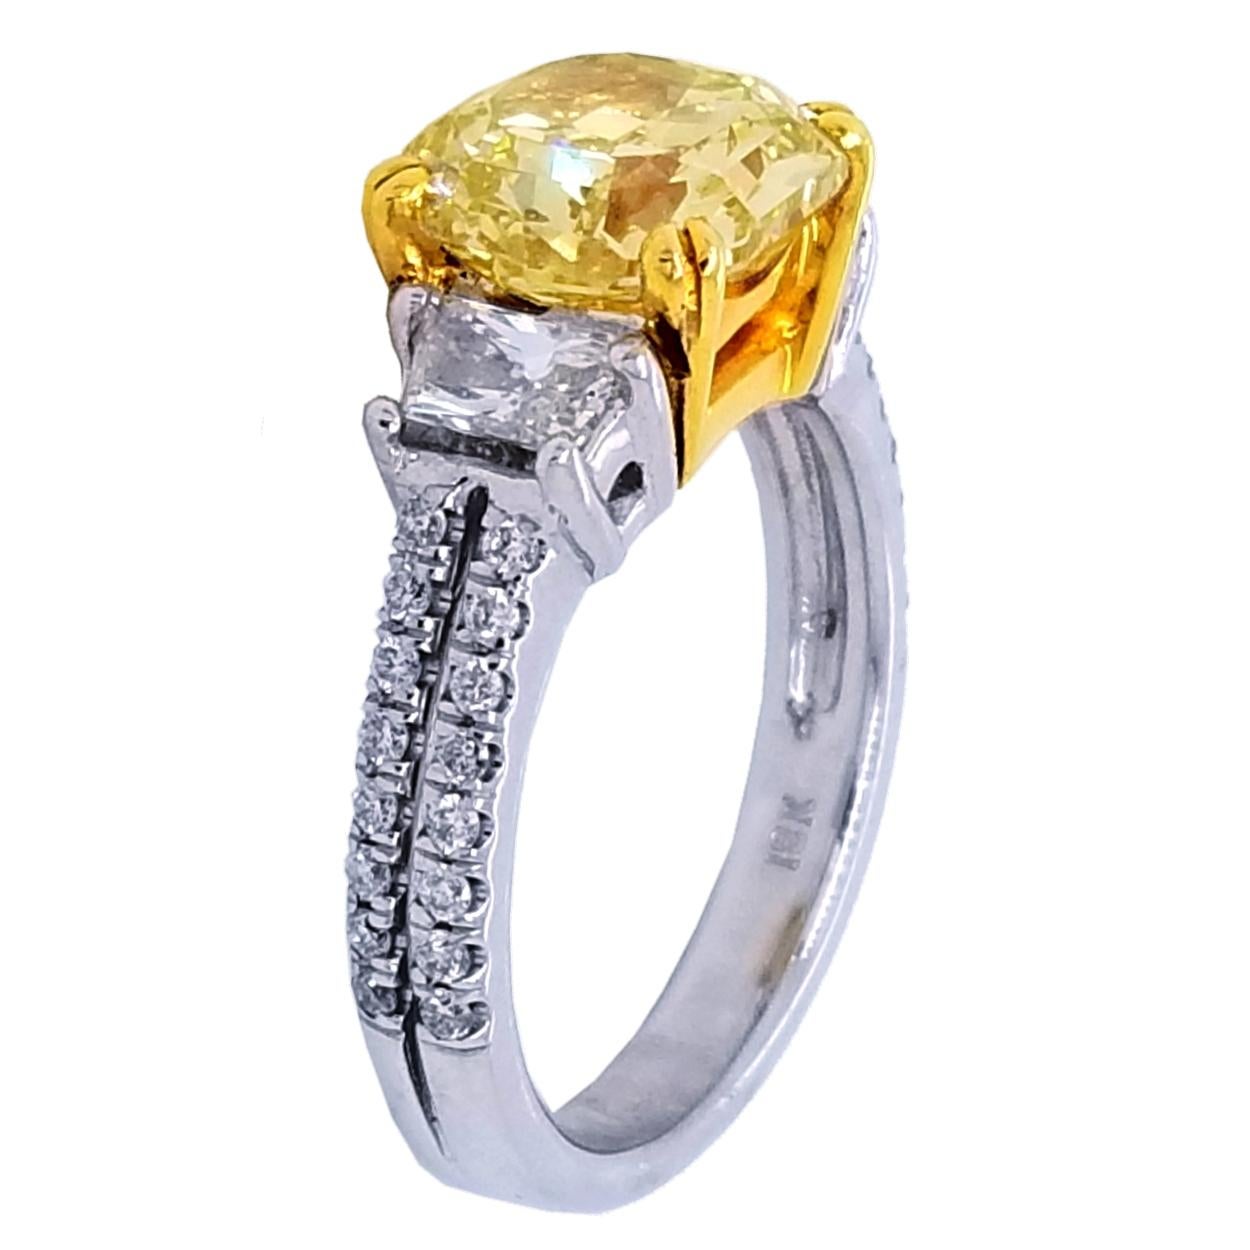 Contemporary GIA 3.06 Ct Fancy Intense Yellow Radiant 18K Engagement Ring with 2 Traps